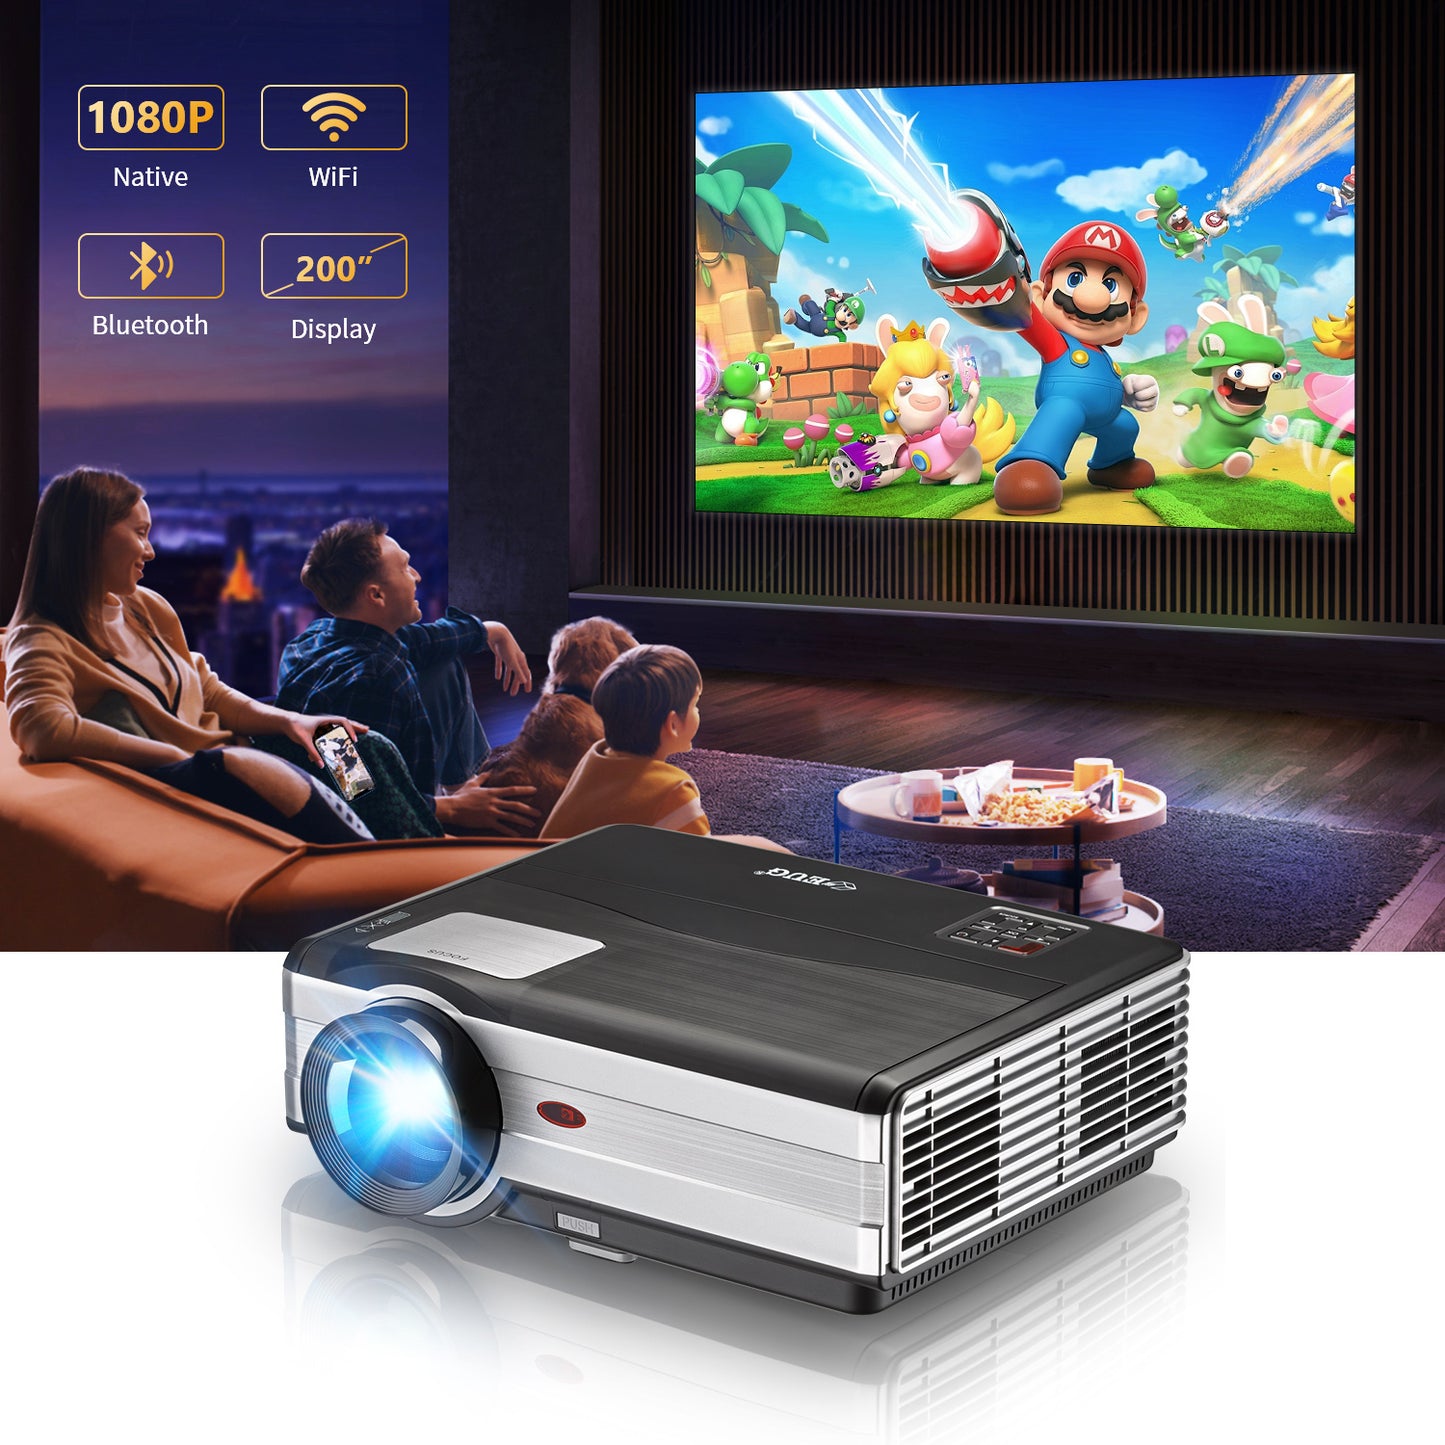 X89 Smart HD Projector Home Theater, Android 6.0 LCD Multimedia Projector for Laptop Gaming